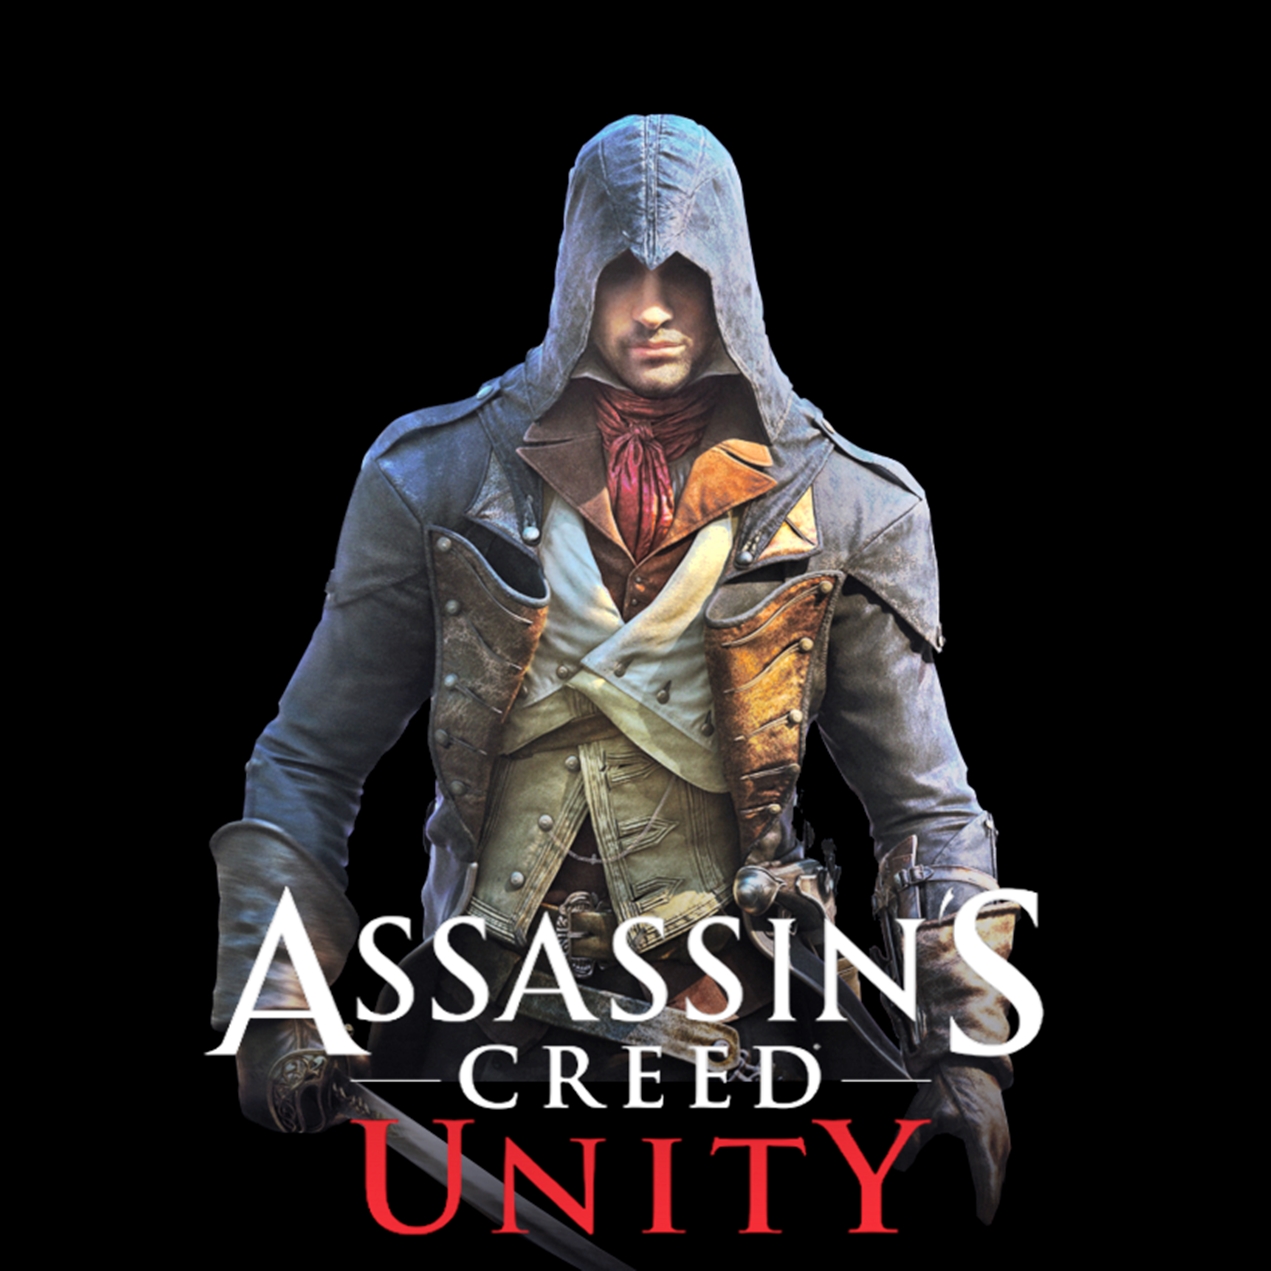 Assassins Creed Unity 2014 Pc Game Overview 